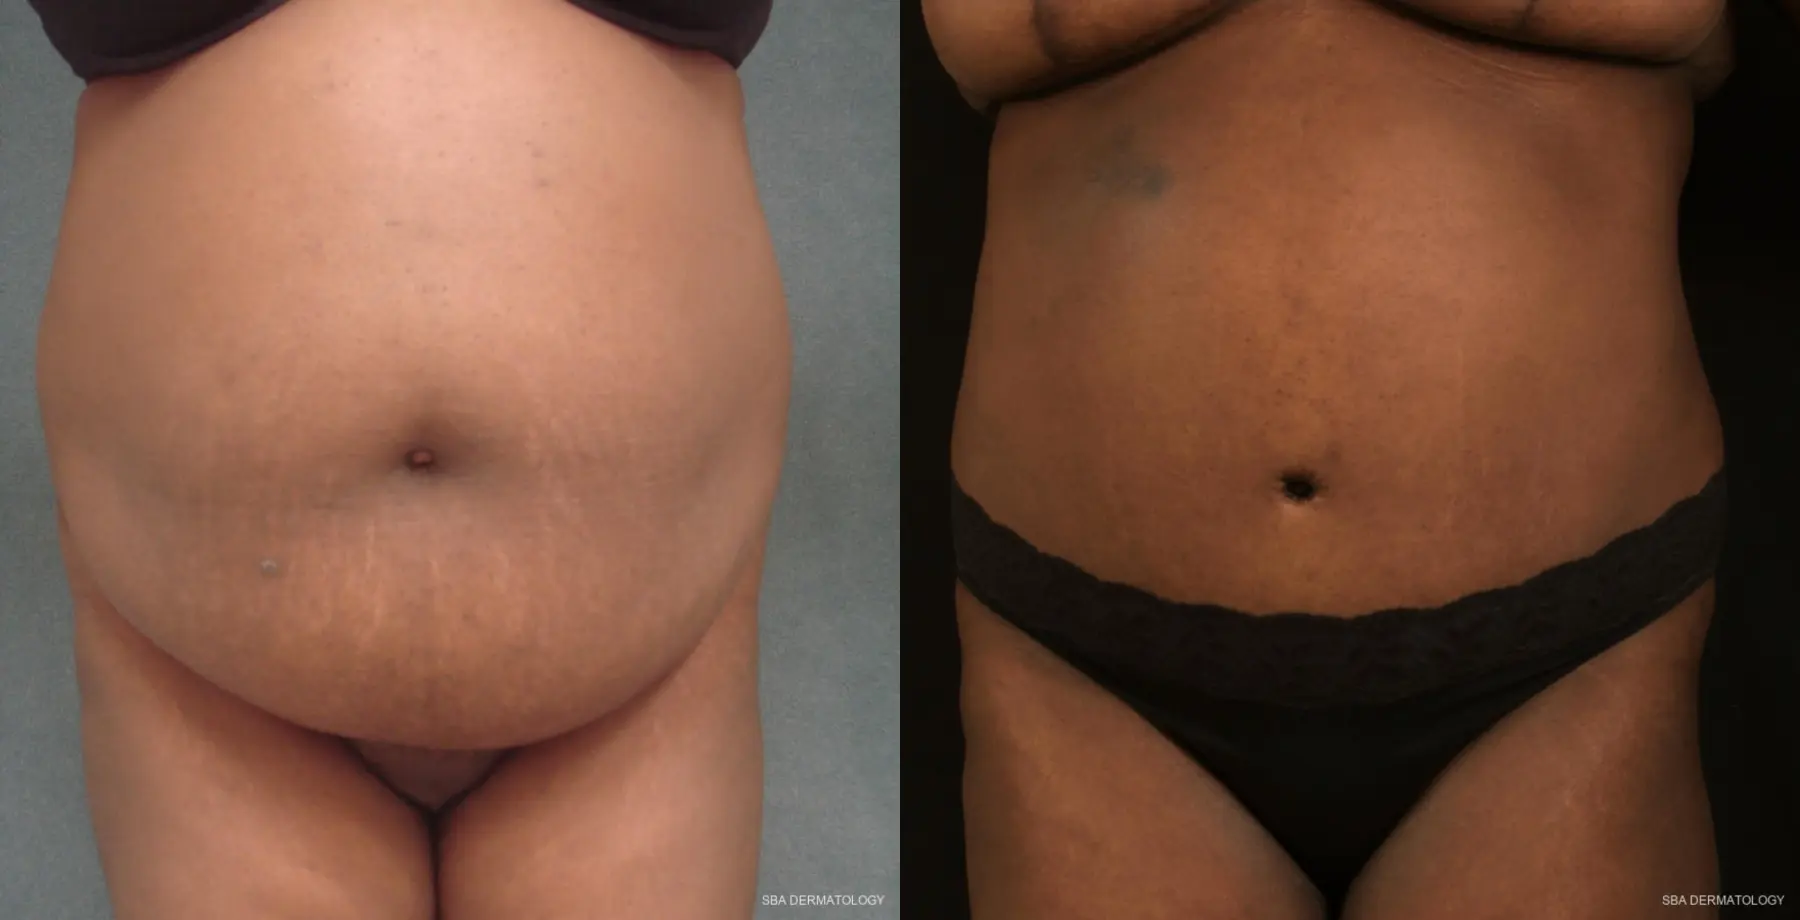 Tummy Tuck: Patient 3 - Before and After 1